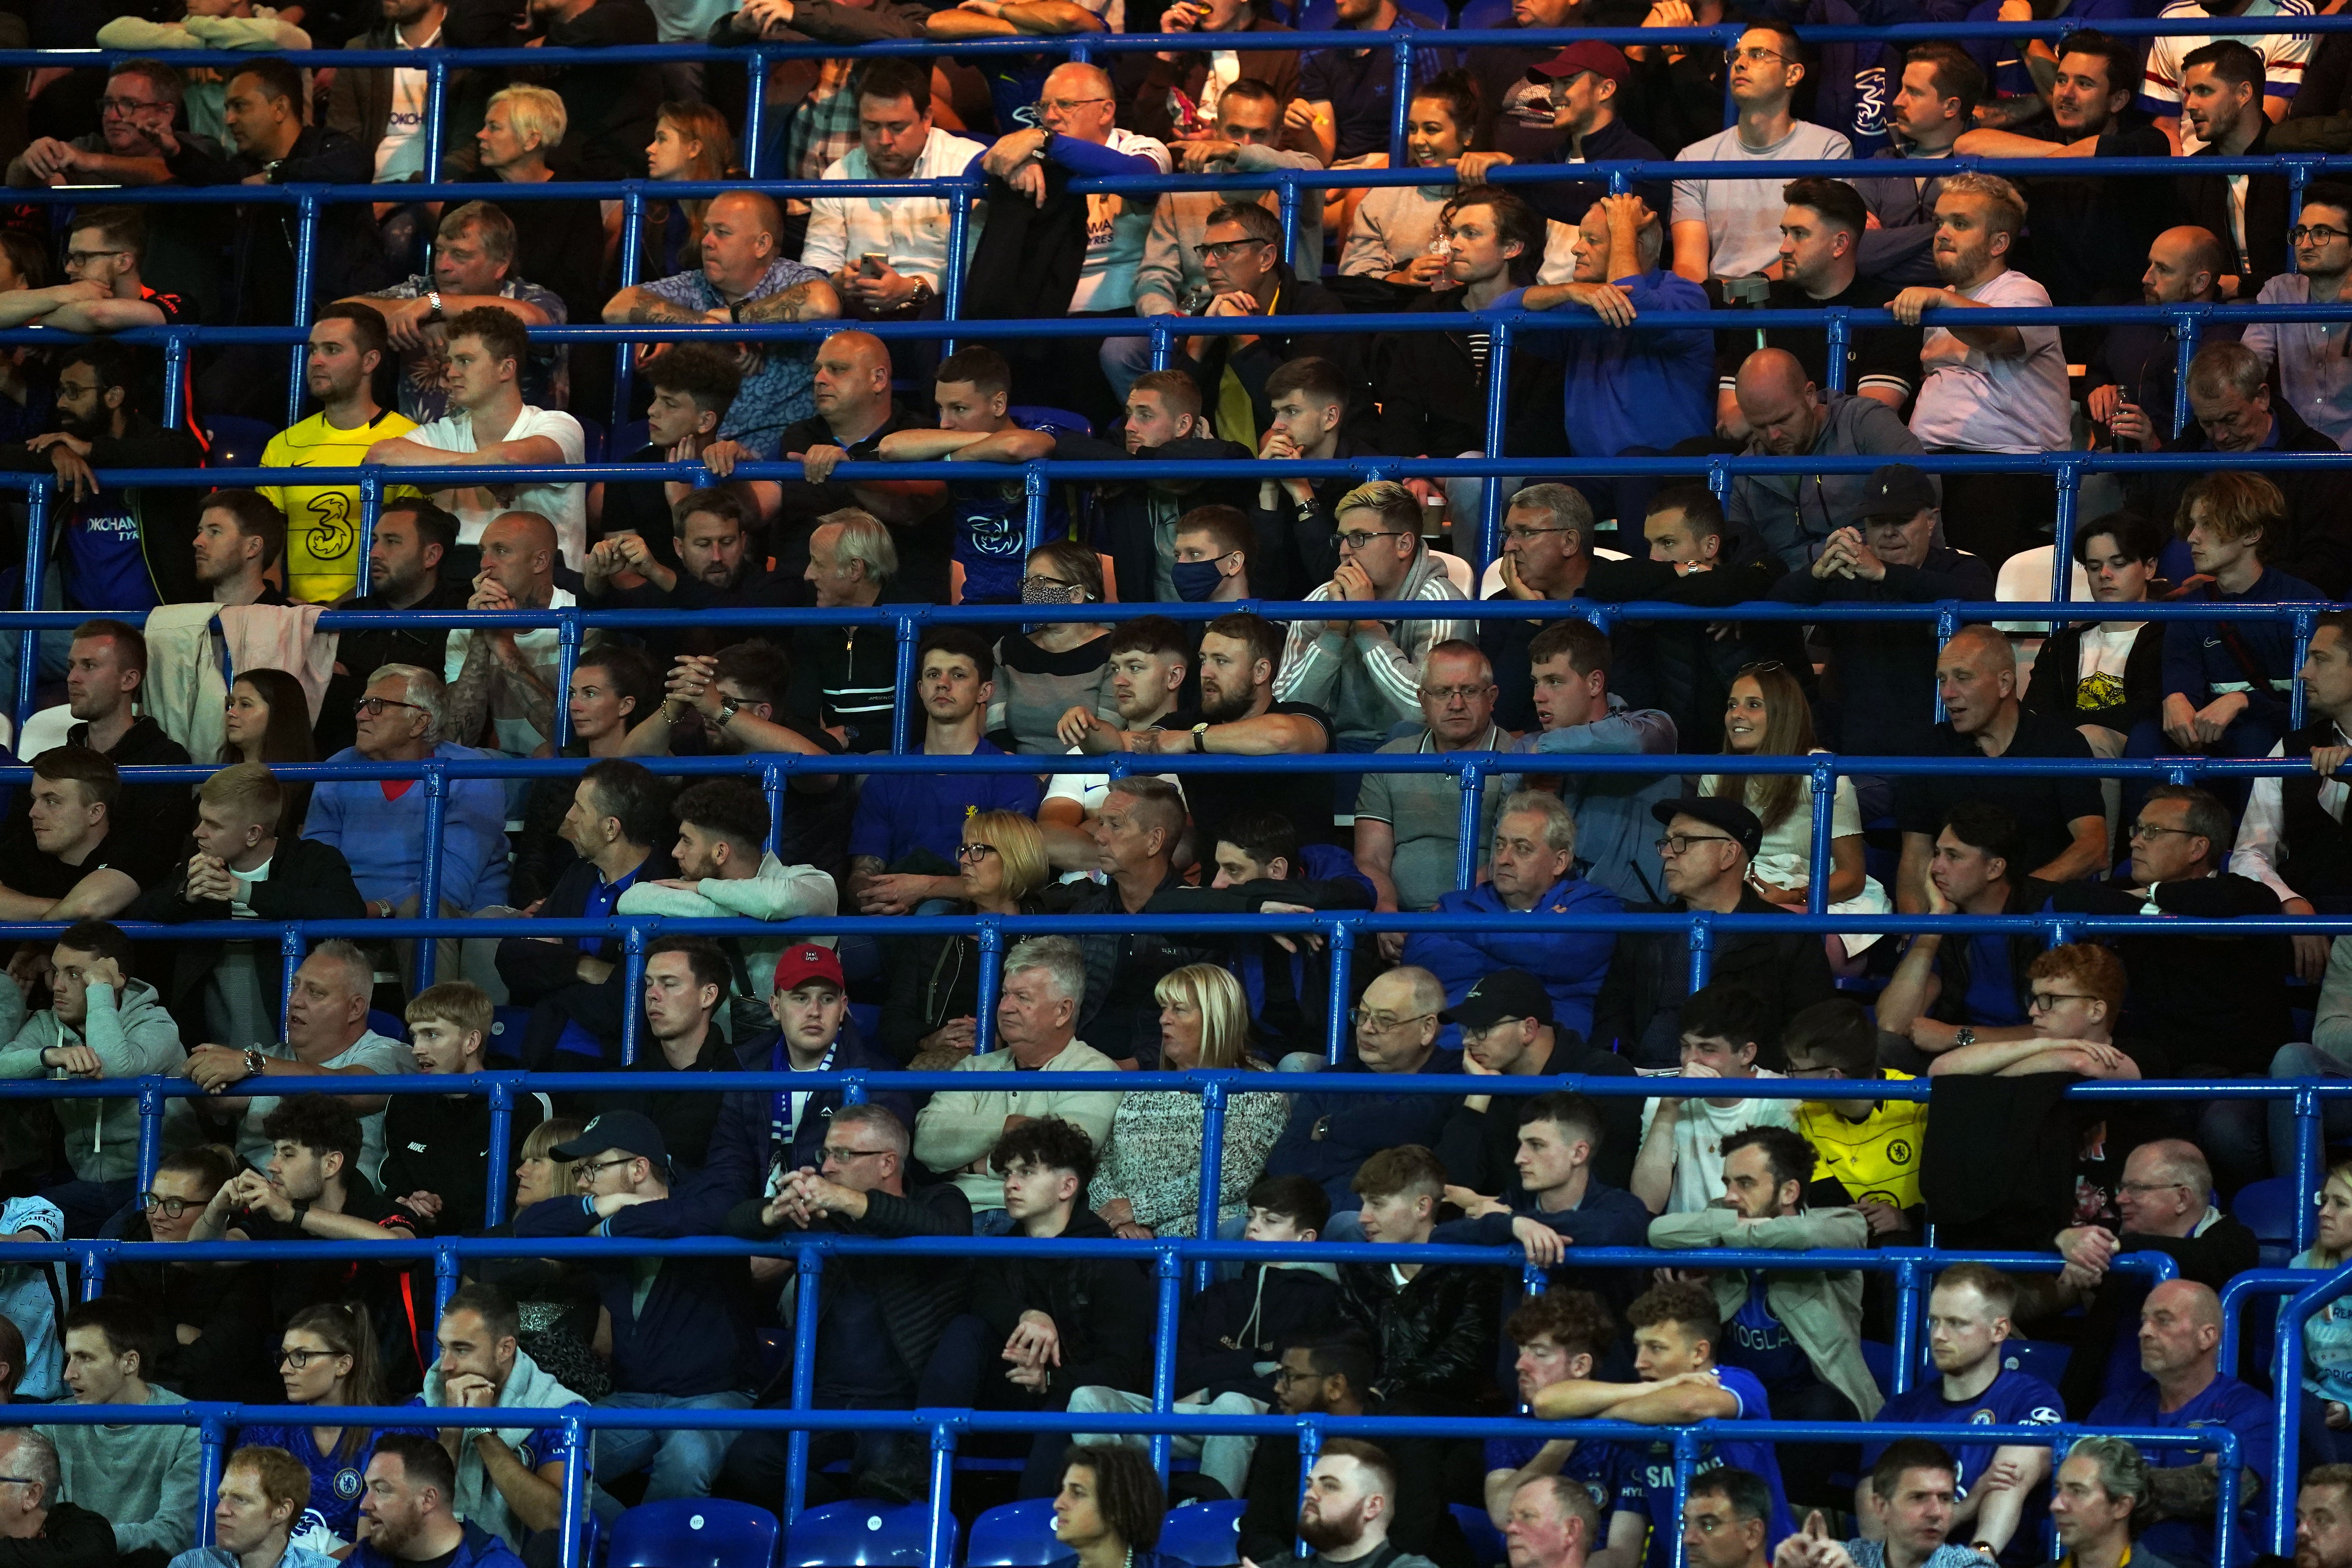 Chelsea are one of five clubs who are part of a safe standing trial